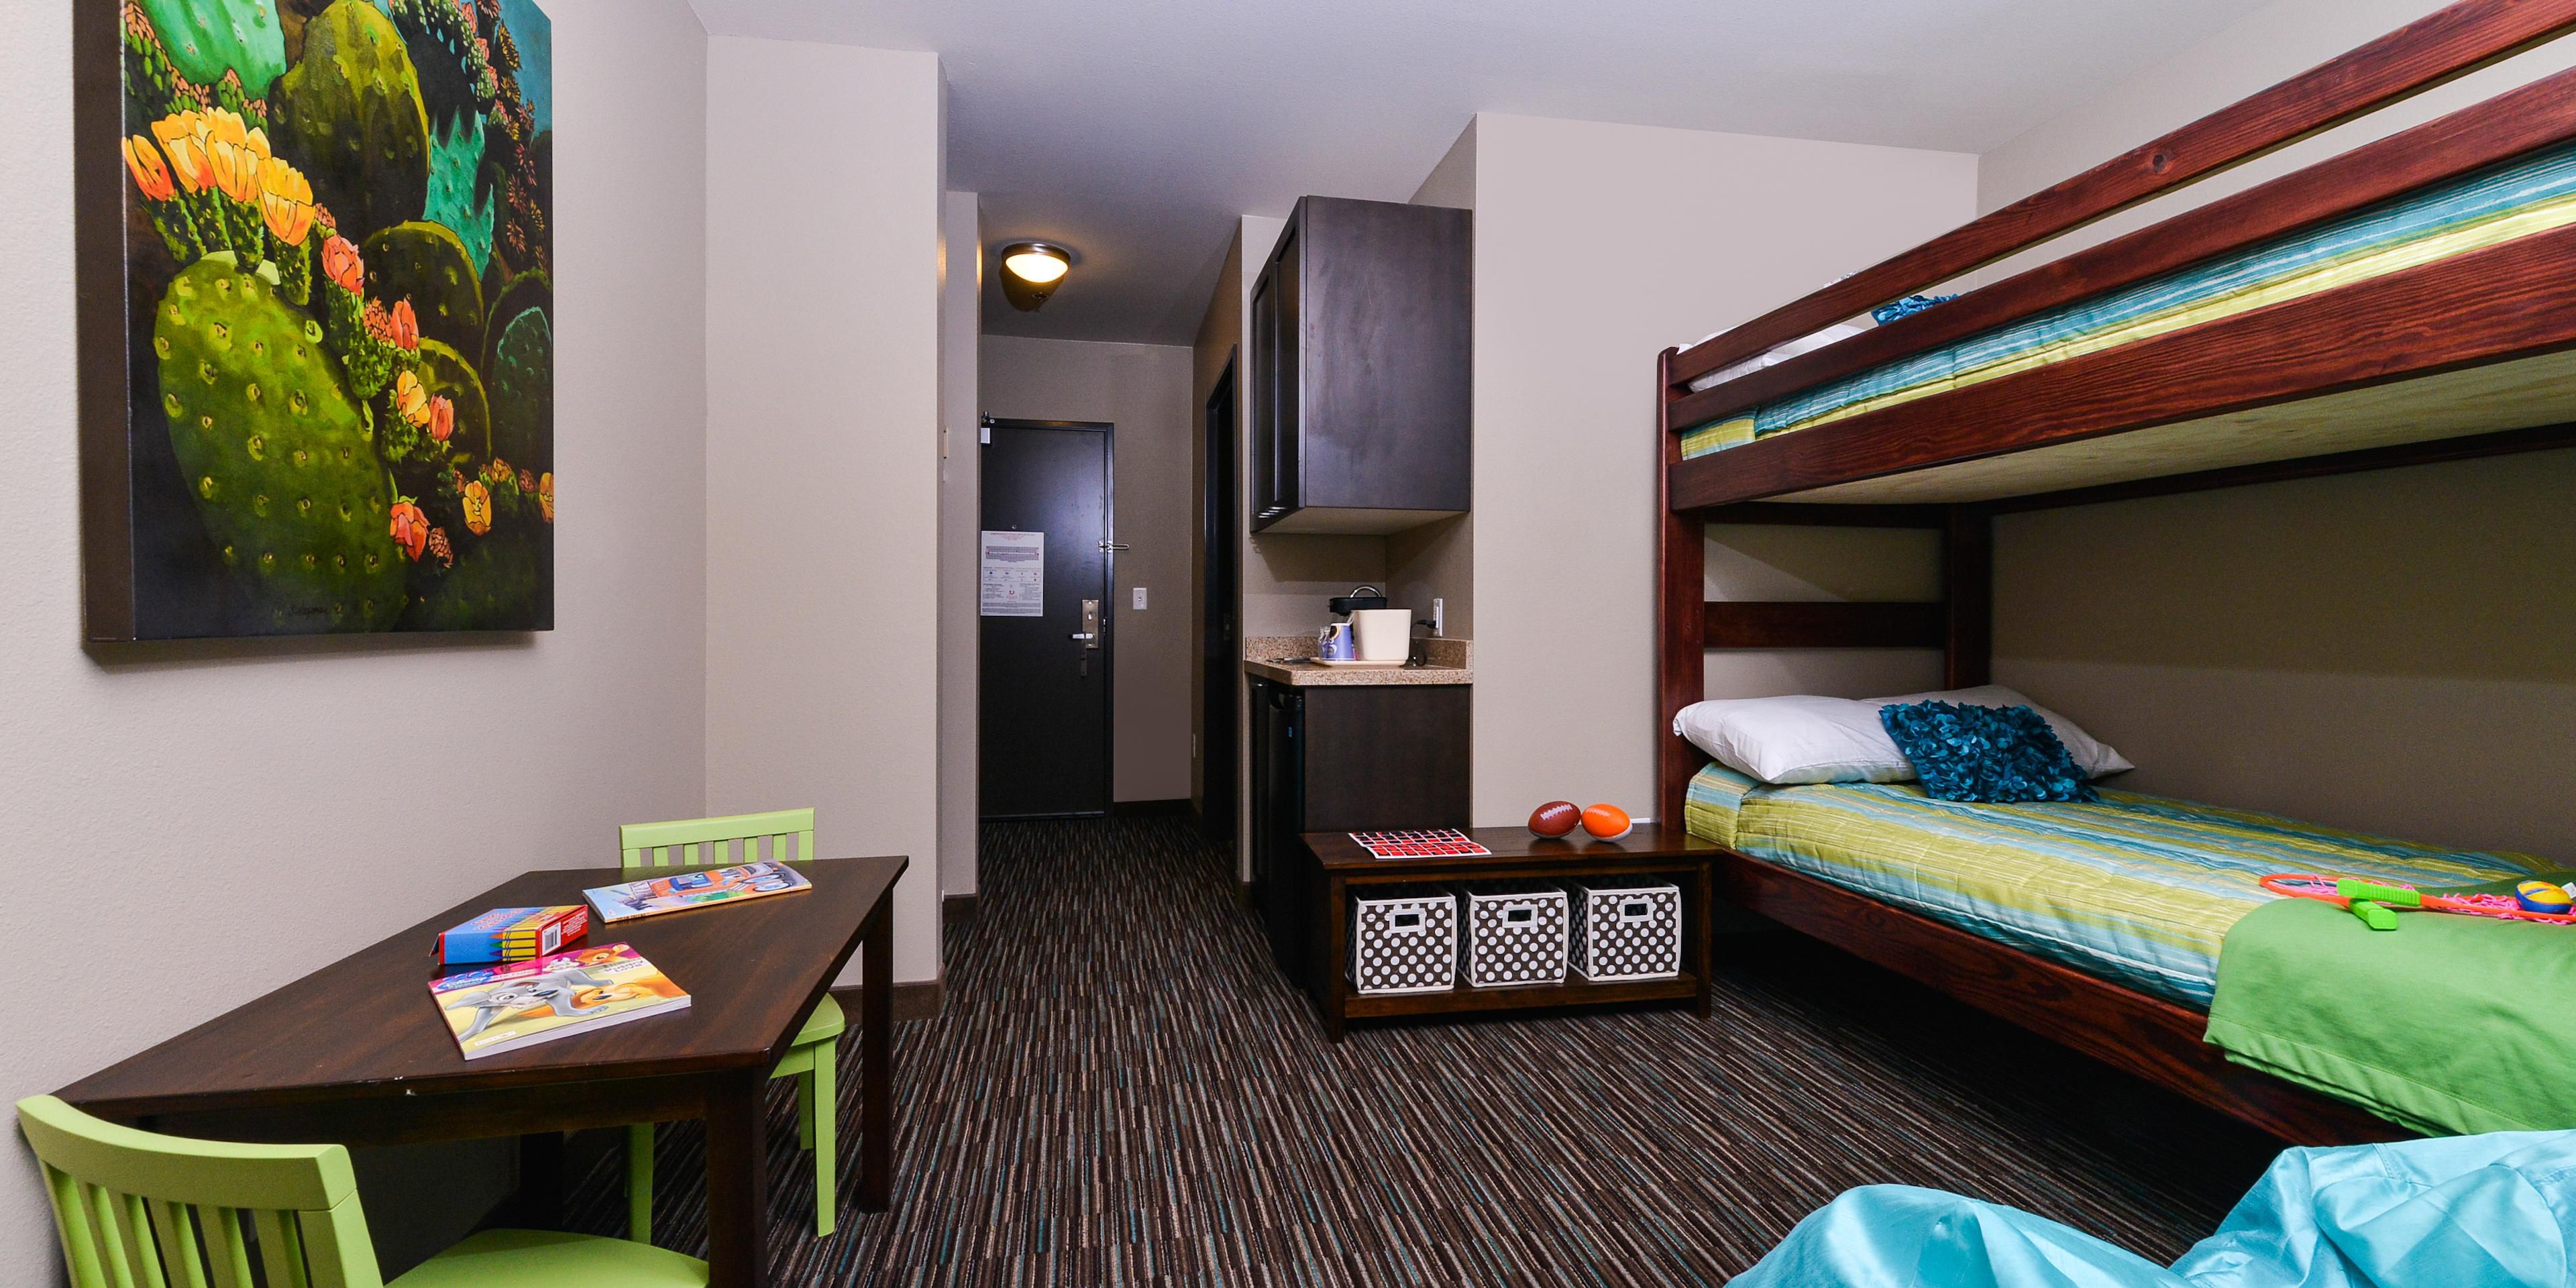 The Holiday Inn and Suites Indio offers a family suite equipped with bunk beds, perfect for your family getaway.